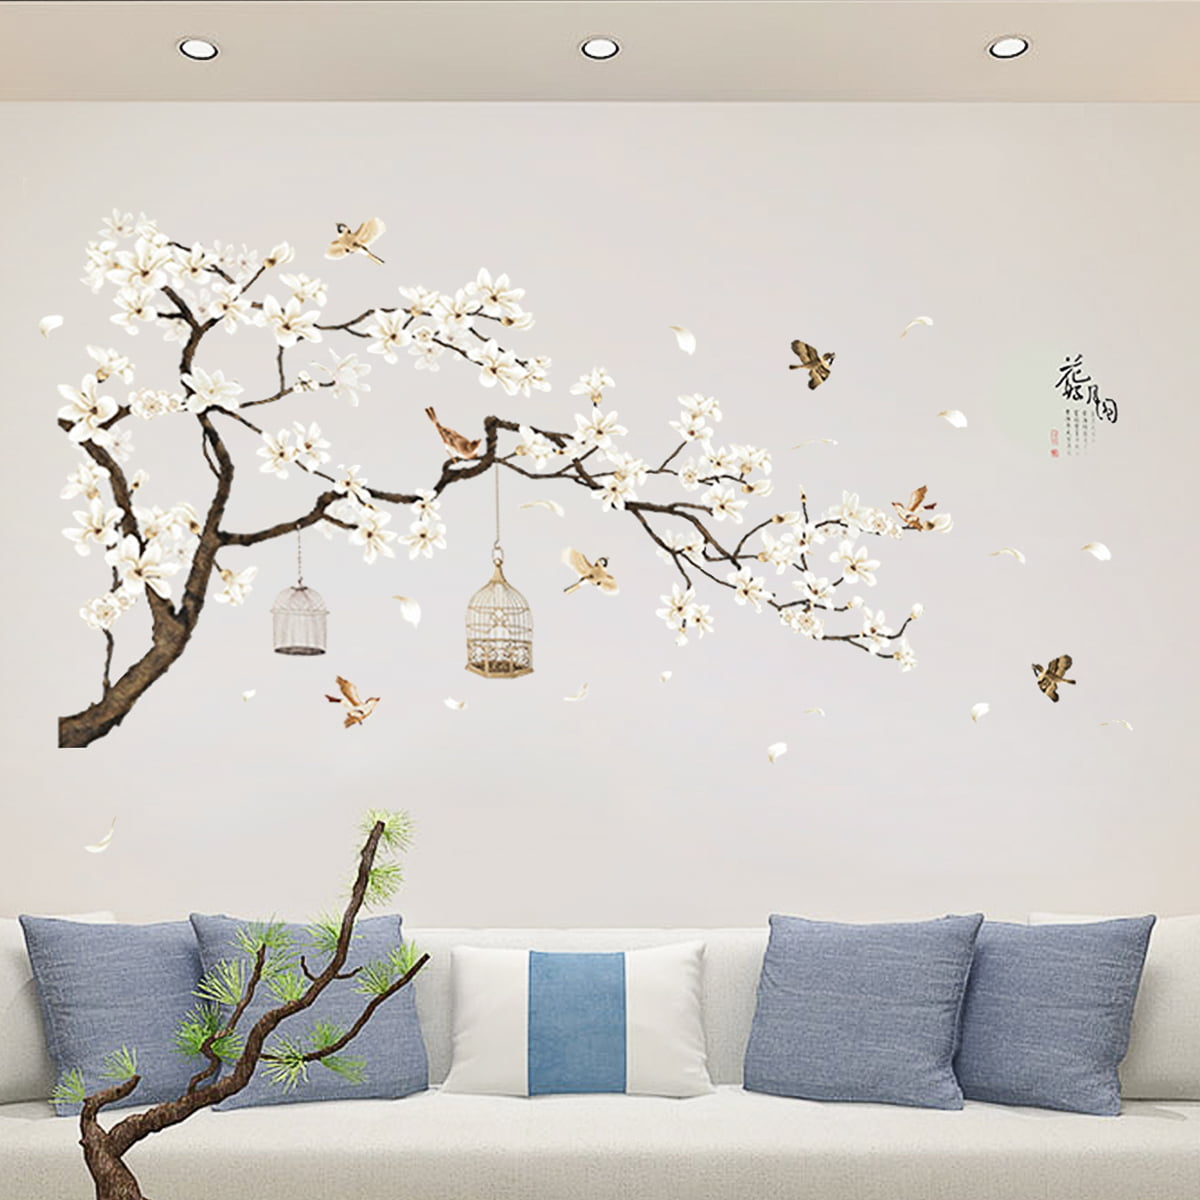 DIY Romantic Warm White Cherry Blossom Tree and Flower Wall Decal 3D Wall Art Stickers for Kids